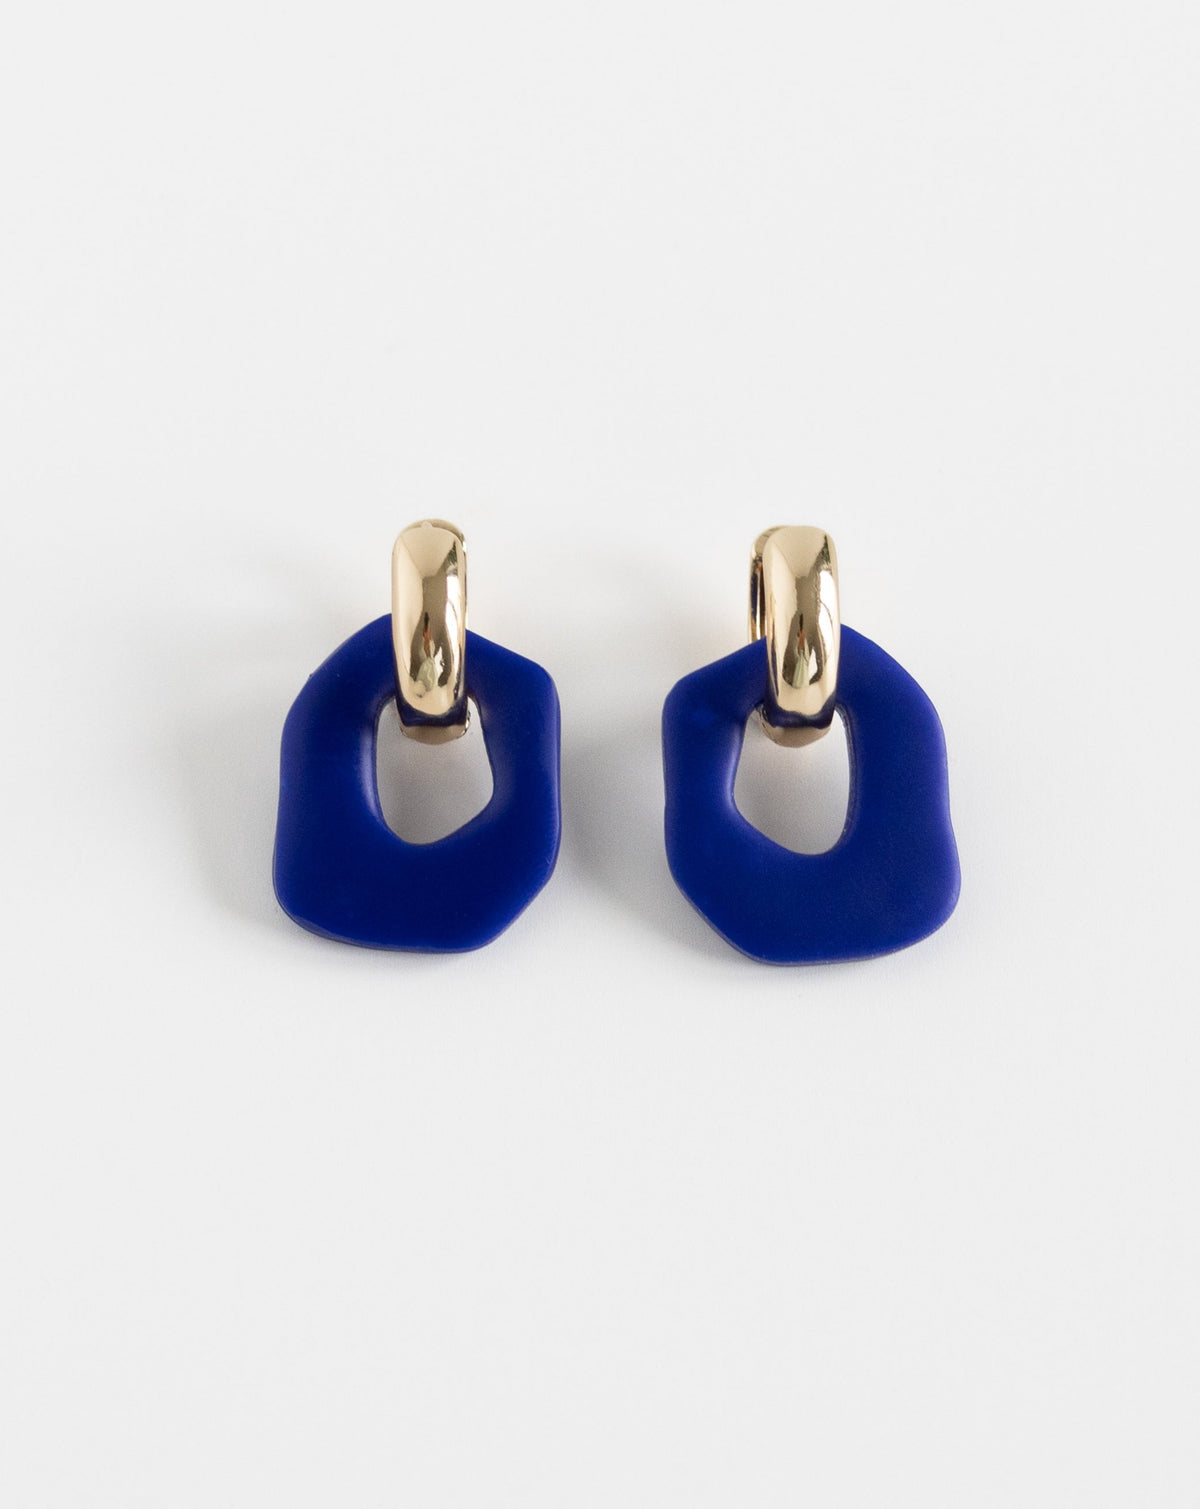 Darien earrings in Hue Blue color with gold hoops, front view